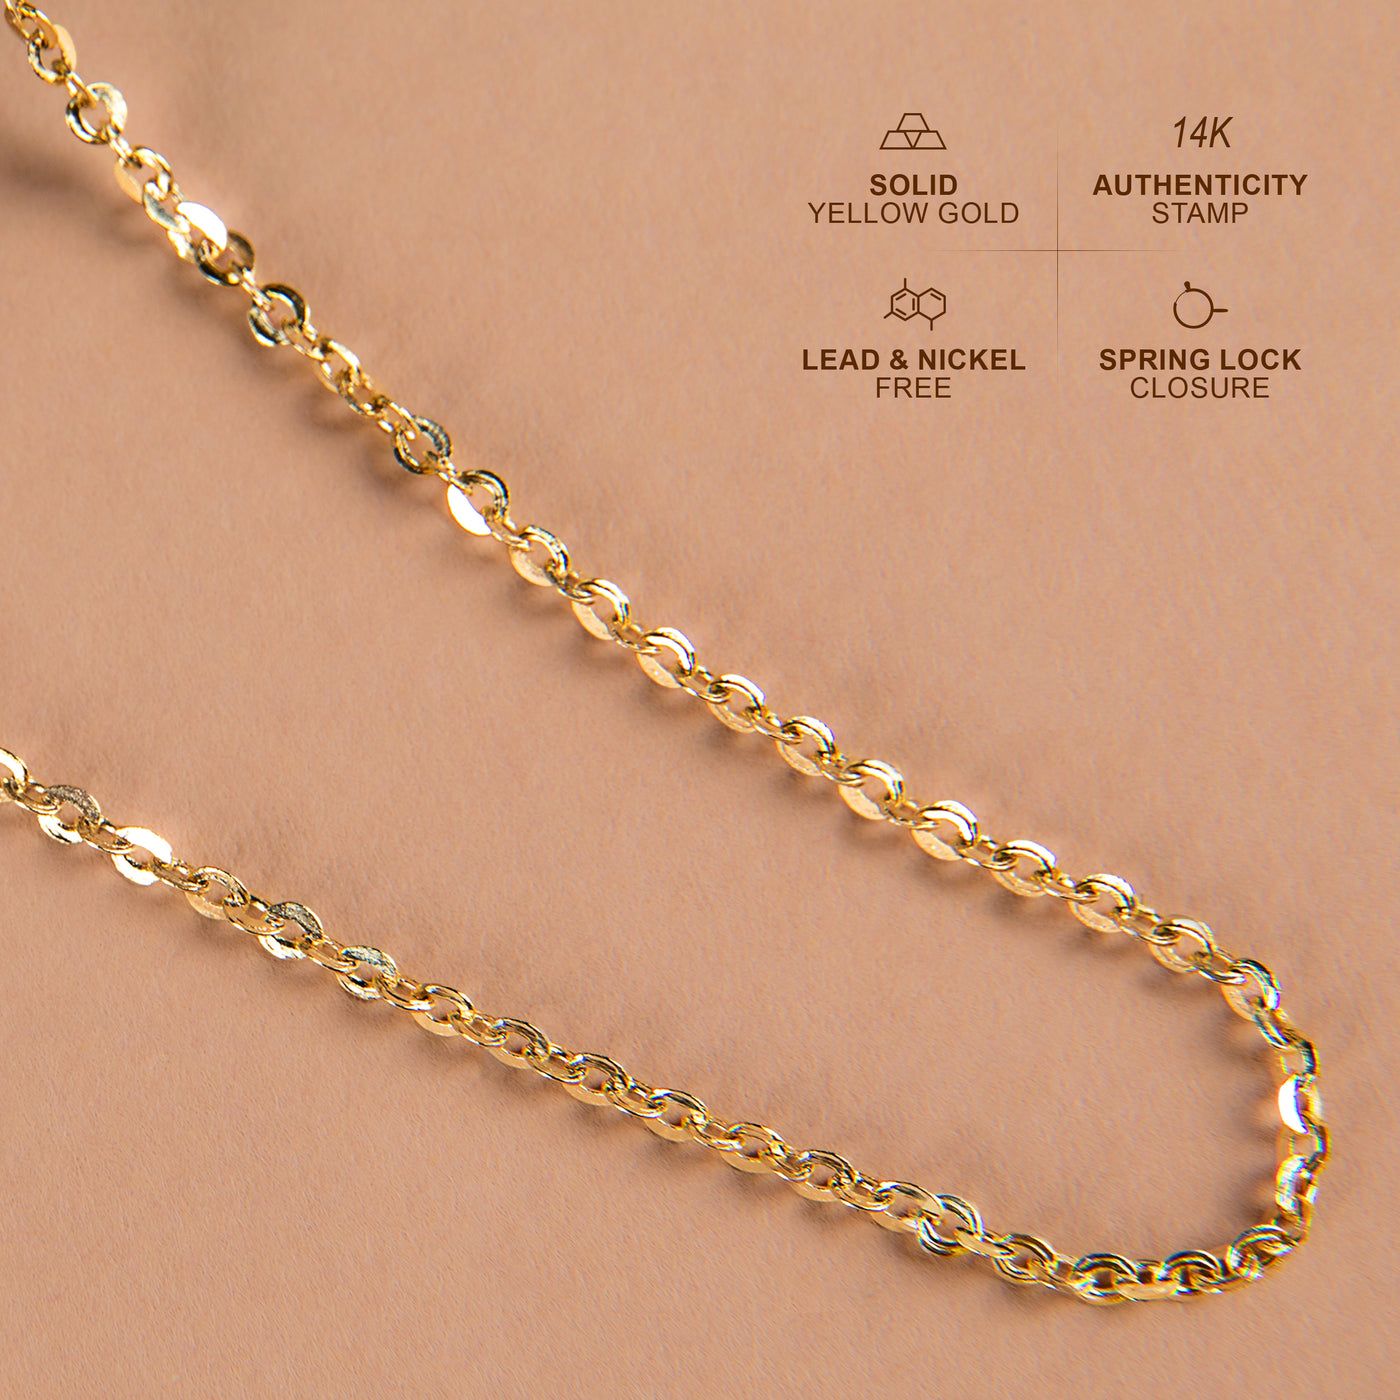 14K Yellow Gold 2.0MM Diamond Cut Cable Chain Necklace